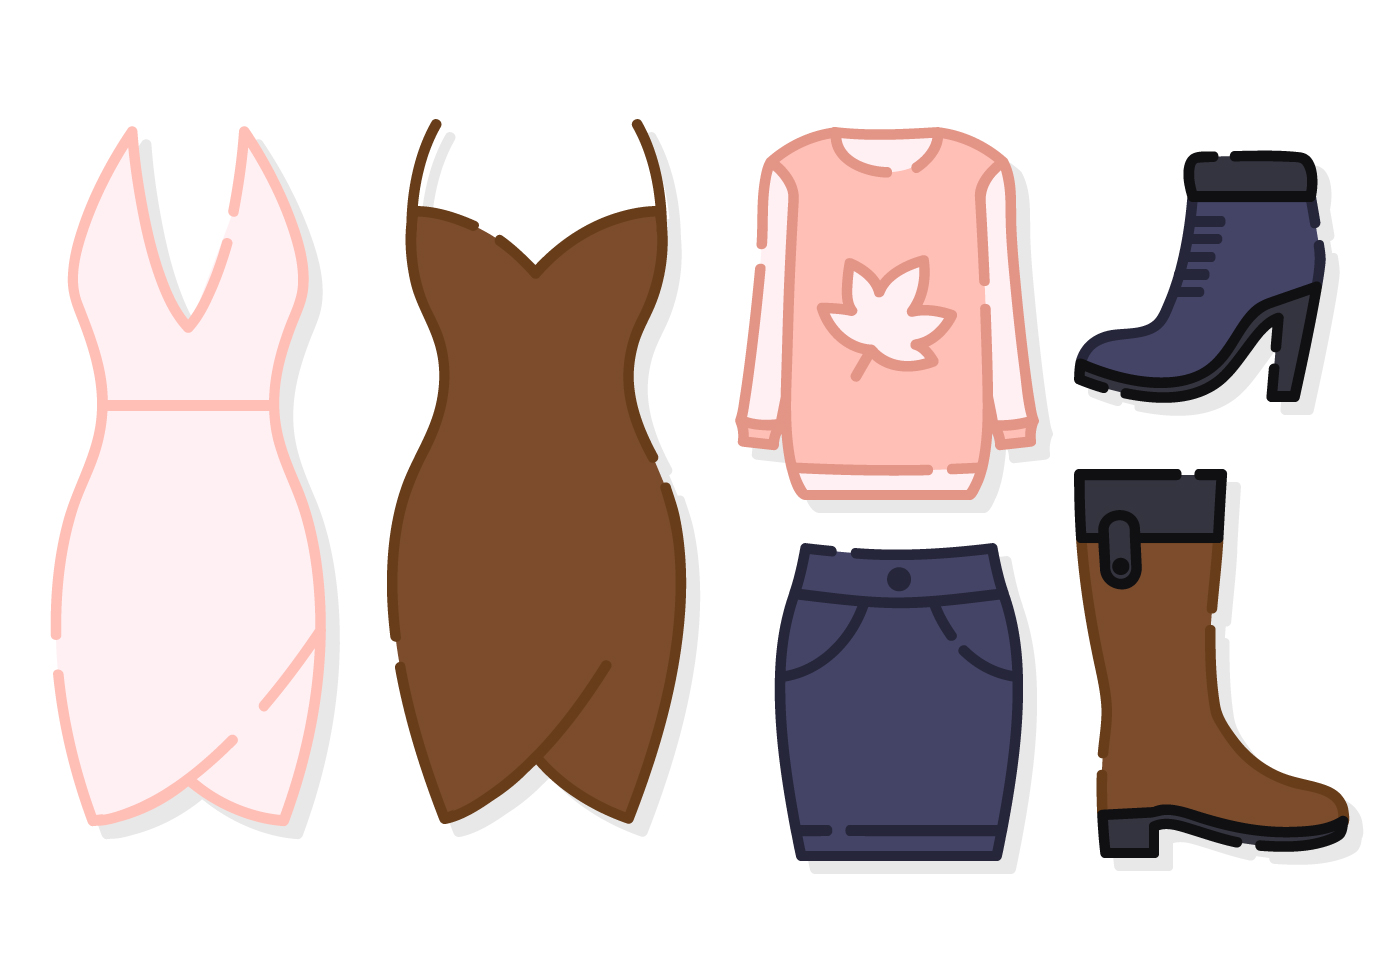 Download Womens Clothes Free Vector Art - (4274 Free Downloads)